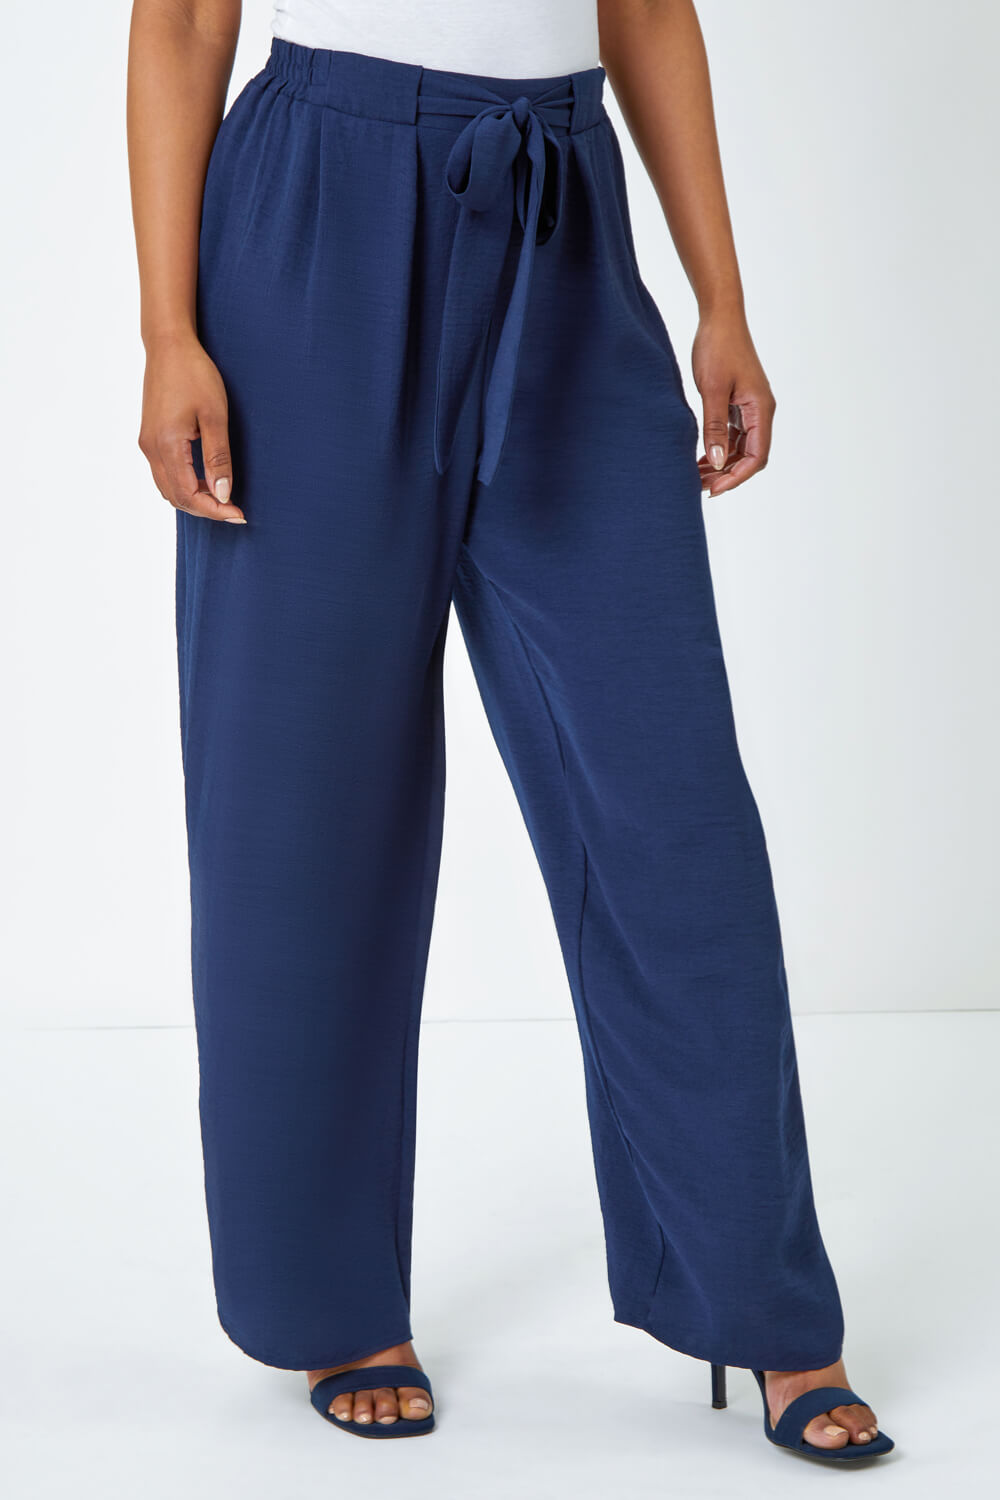 Navy  Petite Wide Leg Belted Trouser, Image 2 of 5